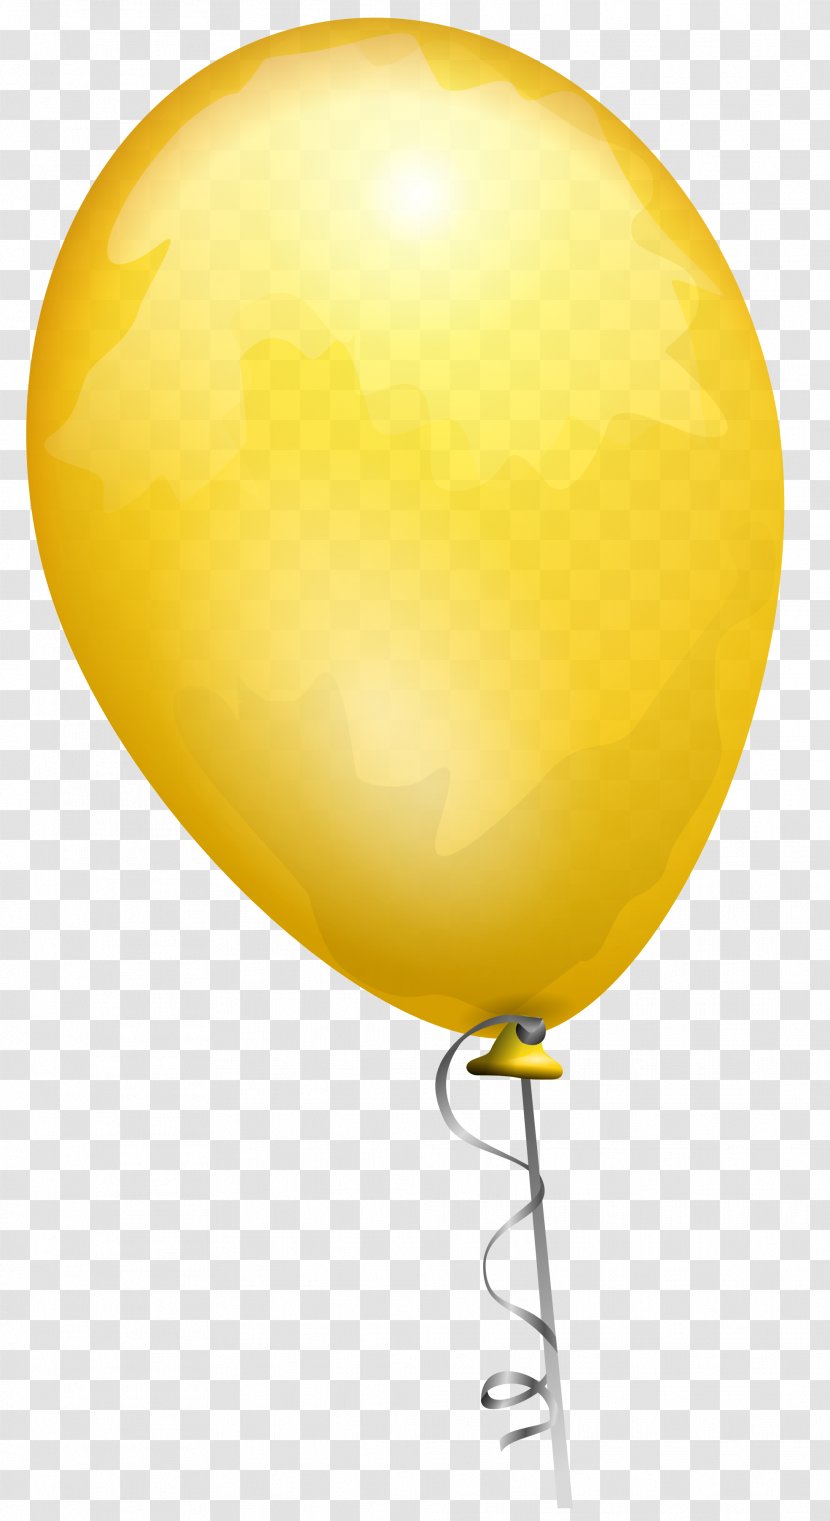 Balloon Clip Art - Sphere - Image, Free Download, Balloons Transparent PNG